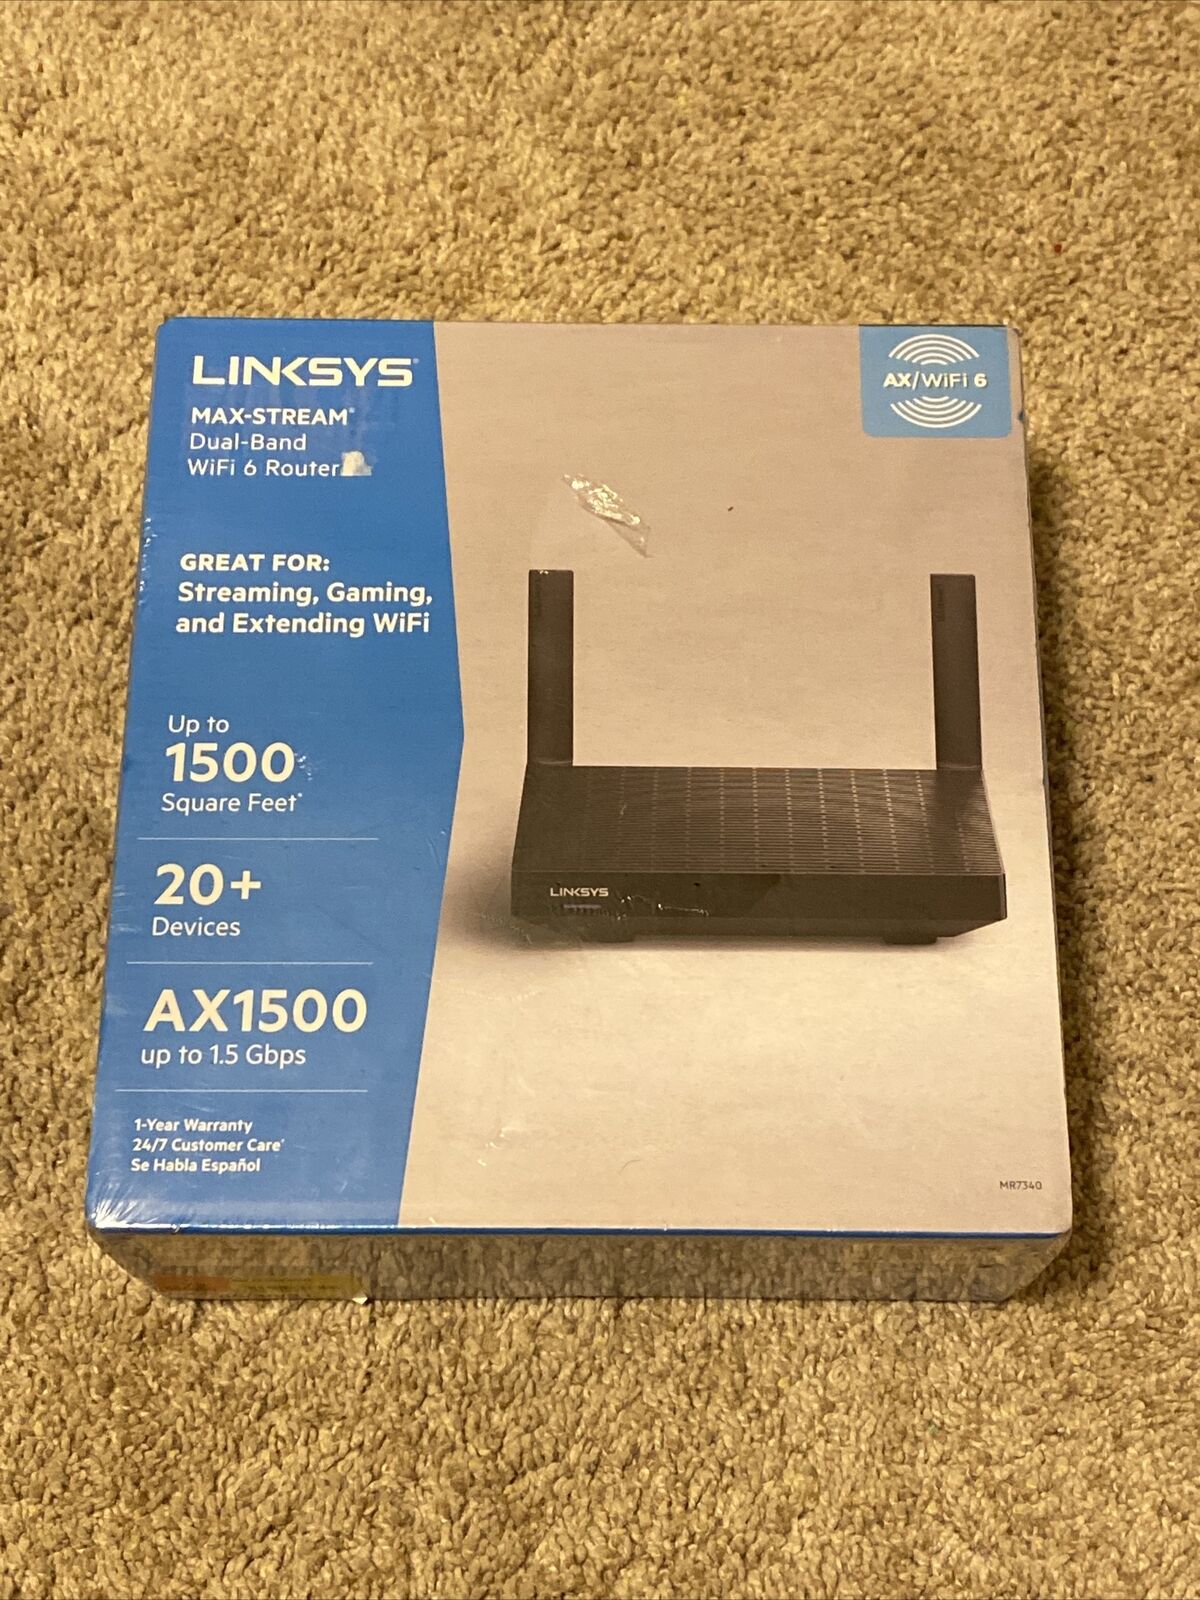 Image 1 - NEW - Linksys MAX-STREAM Dual-Band Mesh AX1500 WiFi 6 Router (MR7340) - SEALED 